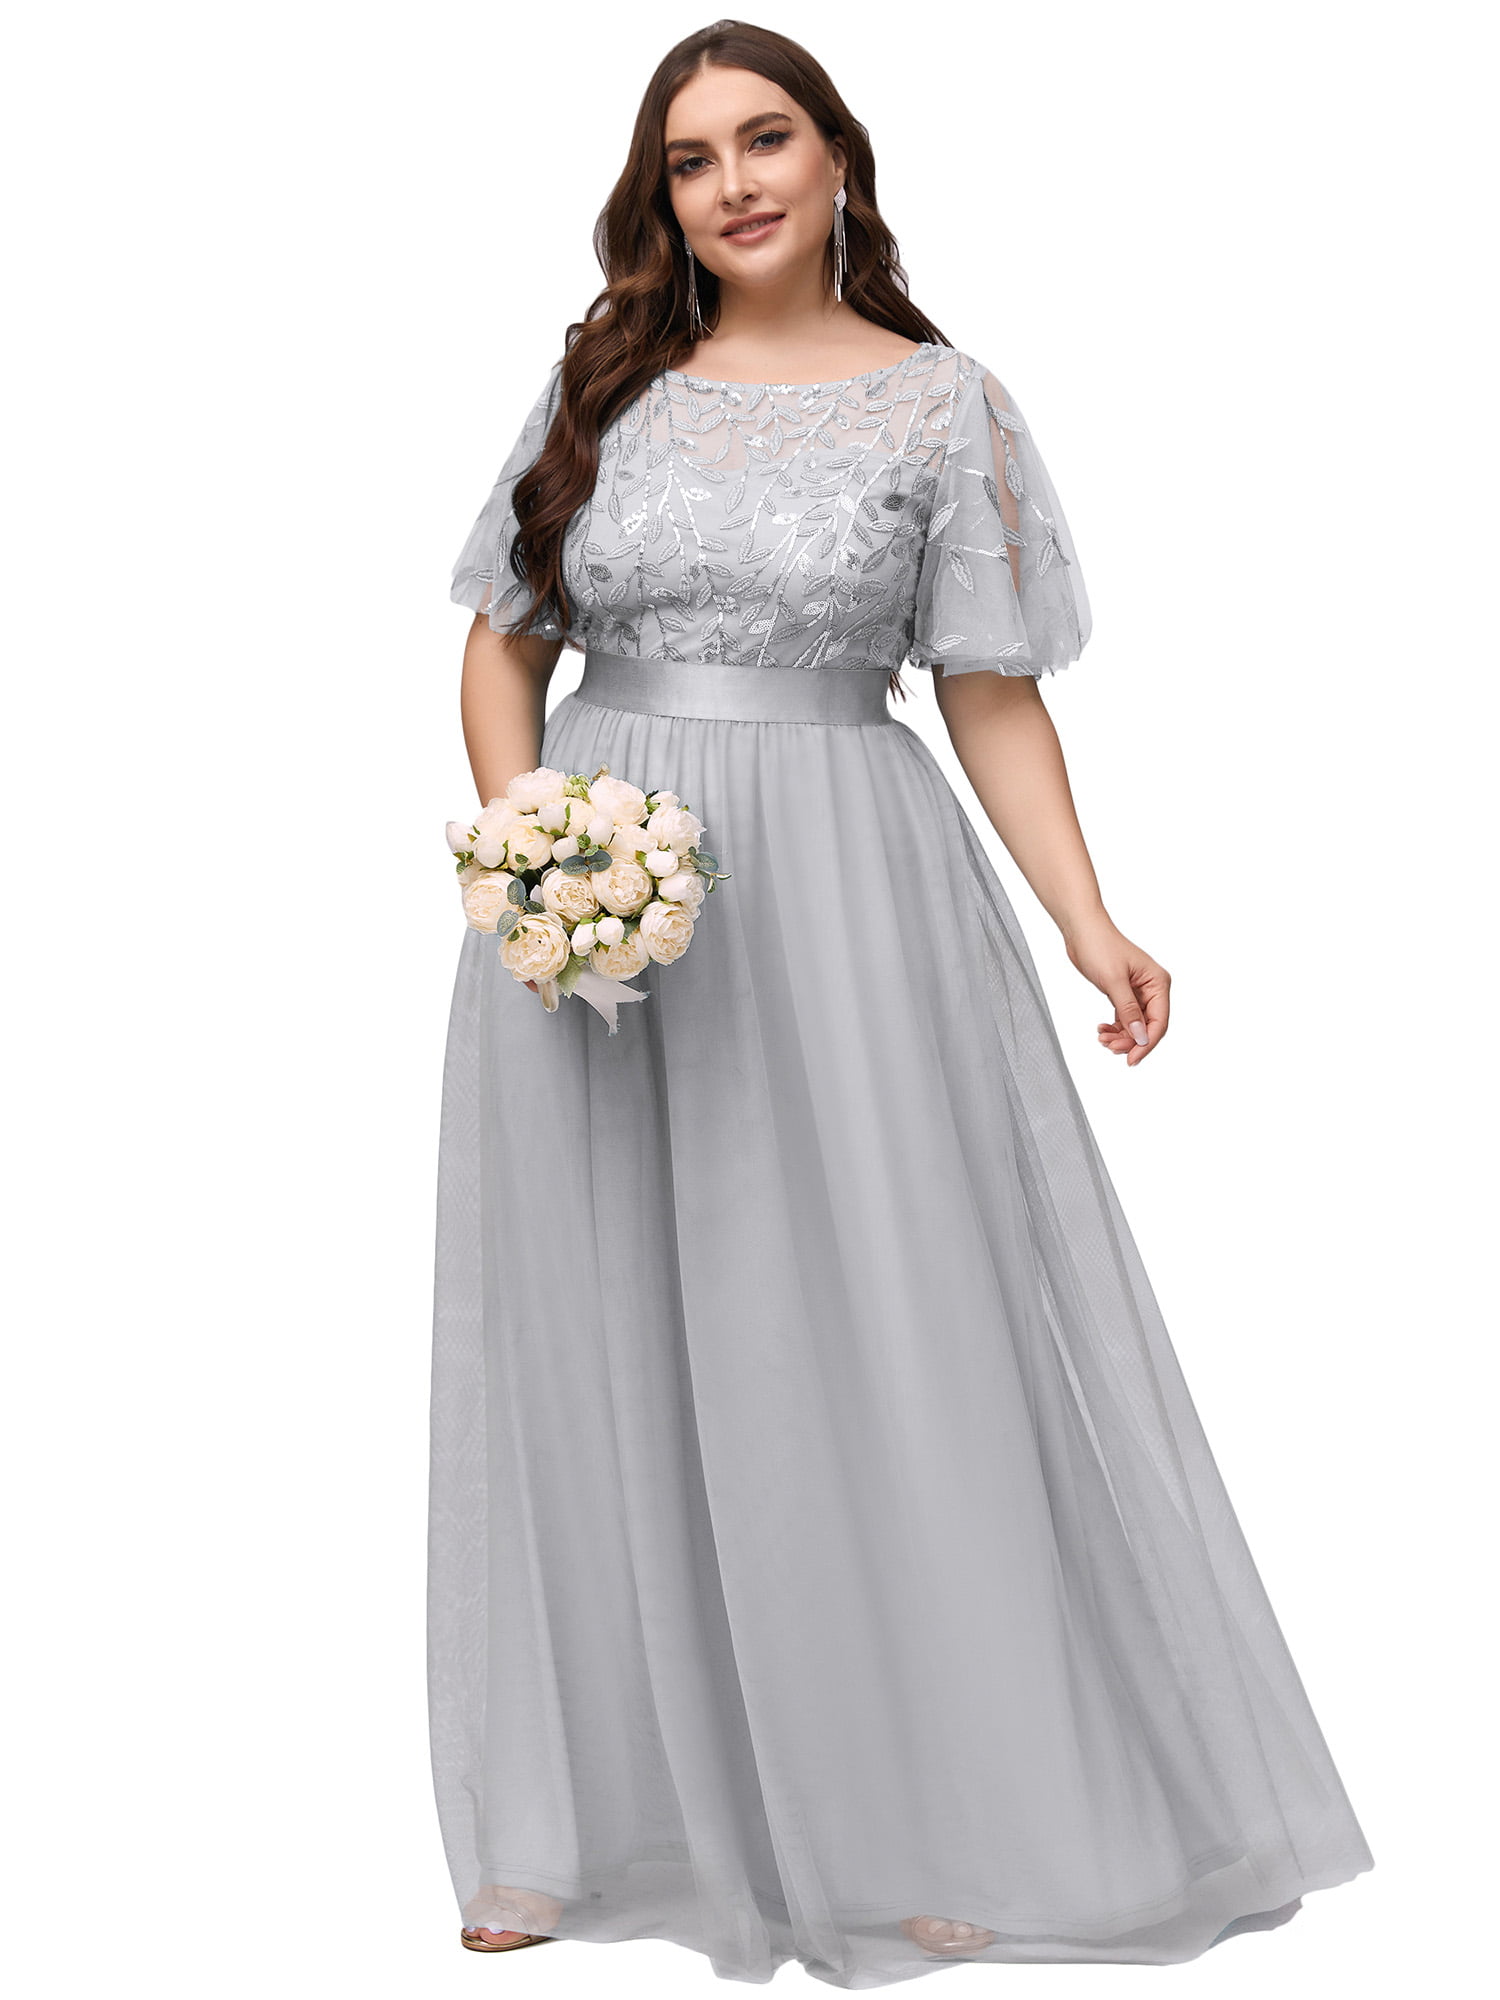 US Ever-Pretty Plus Size Sleeve Long Evening Gown Bodycon Bridesmaid Party Dress 